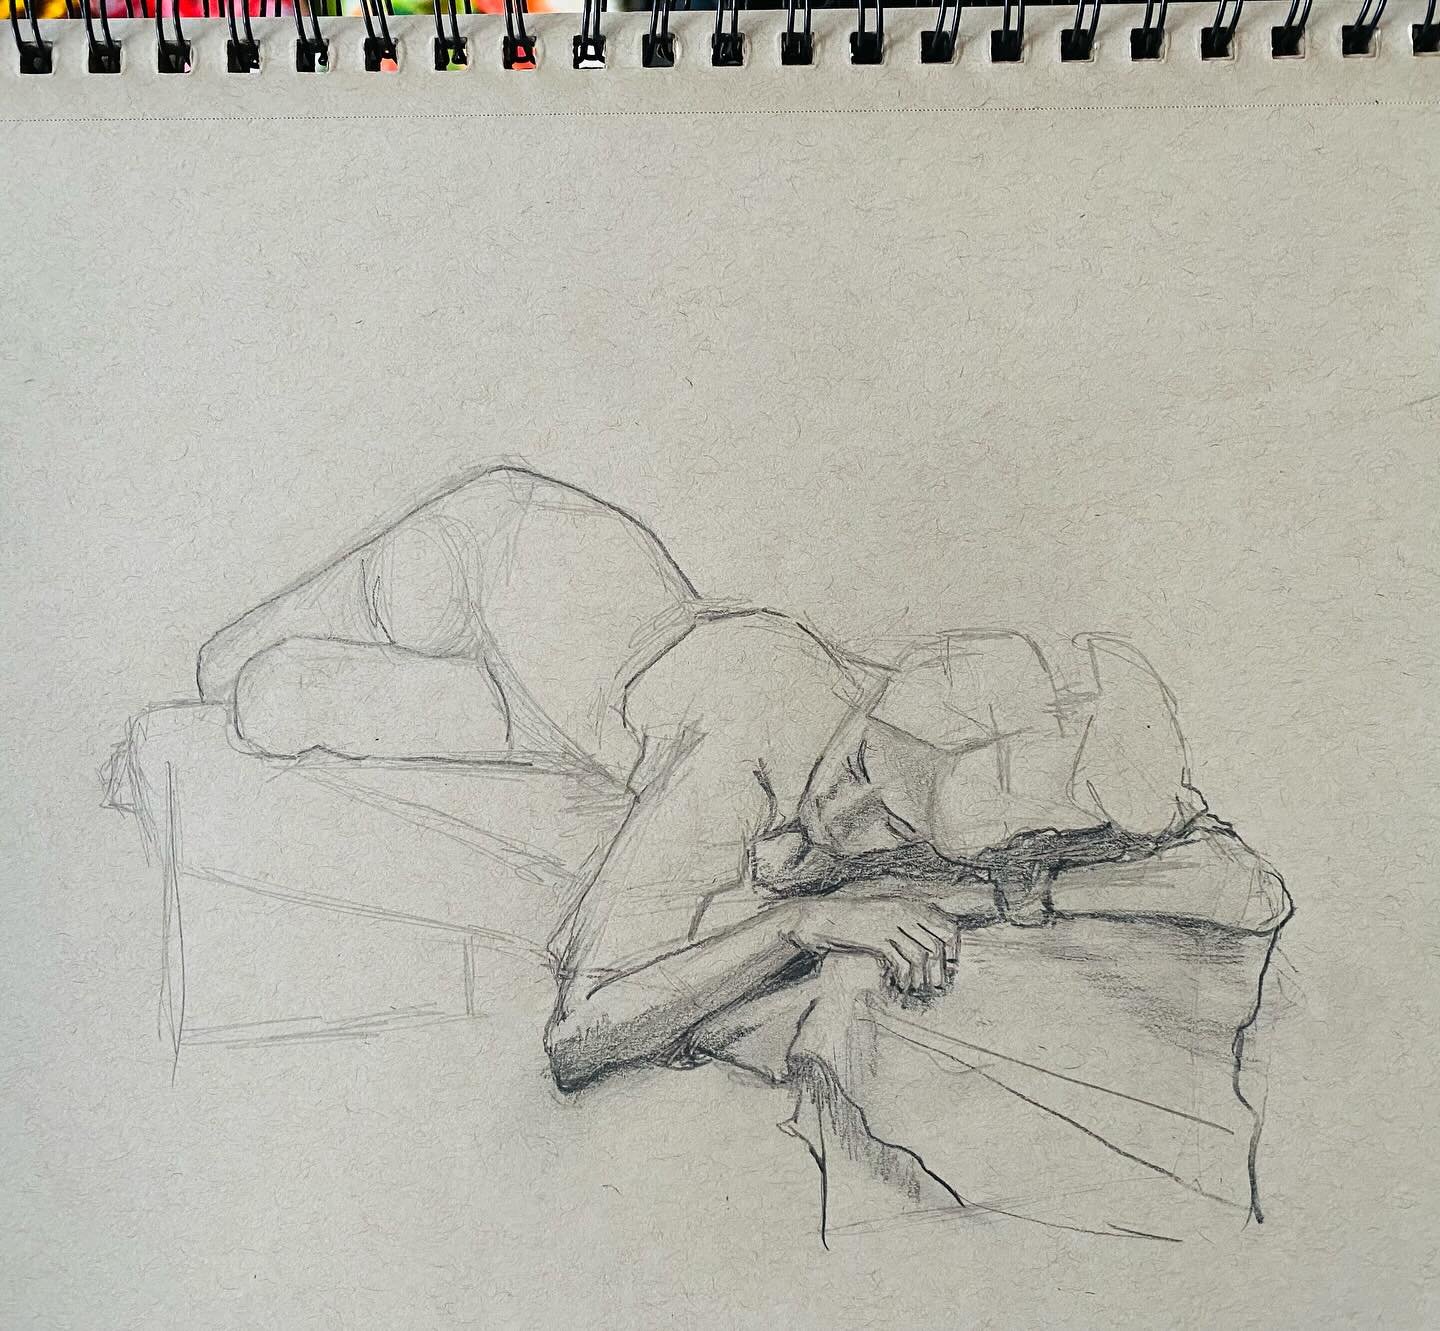 Enjoyed a series of 20min figure drawing sessions at @gutmangallery last night.